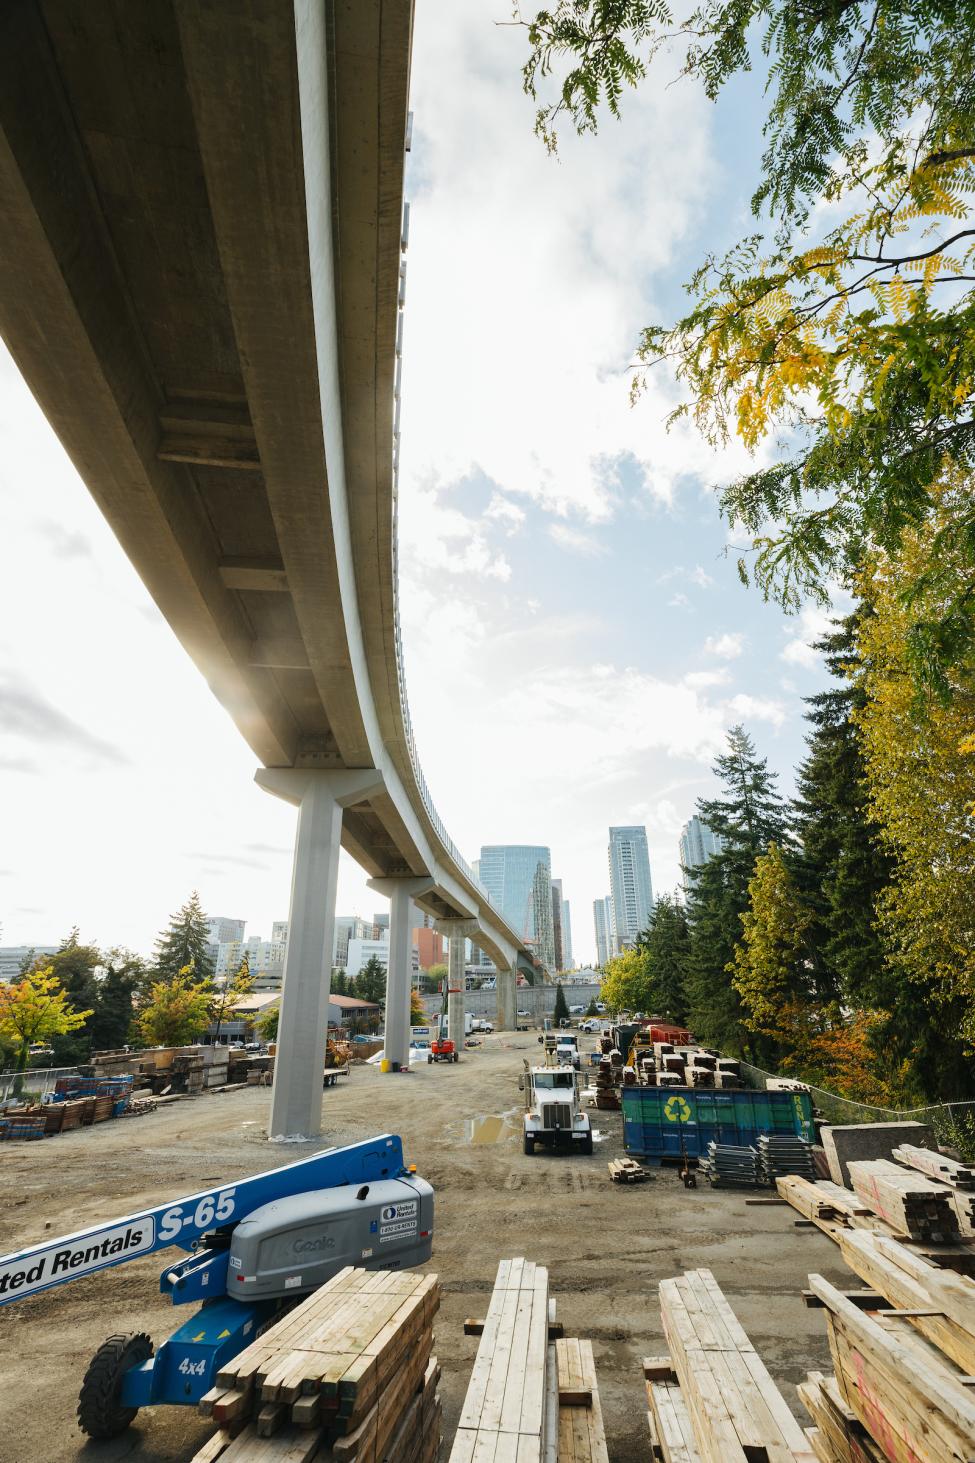 A view from underneath the new light rail bridge in downtown Bellevue.